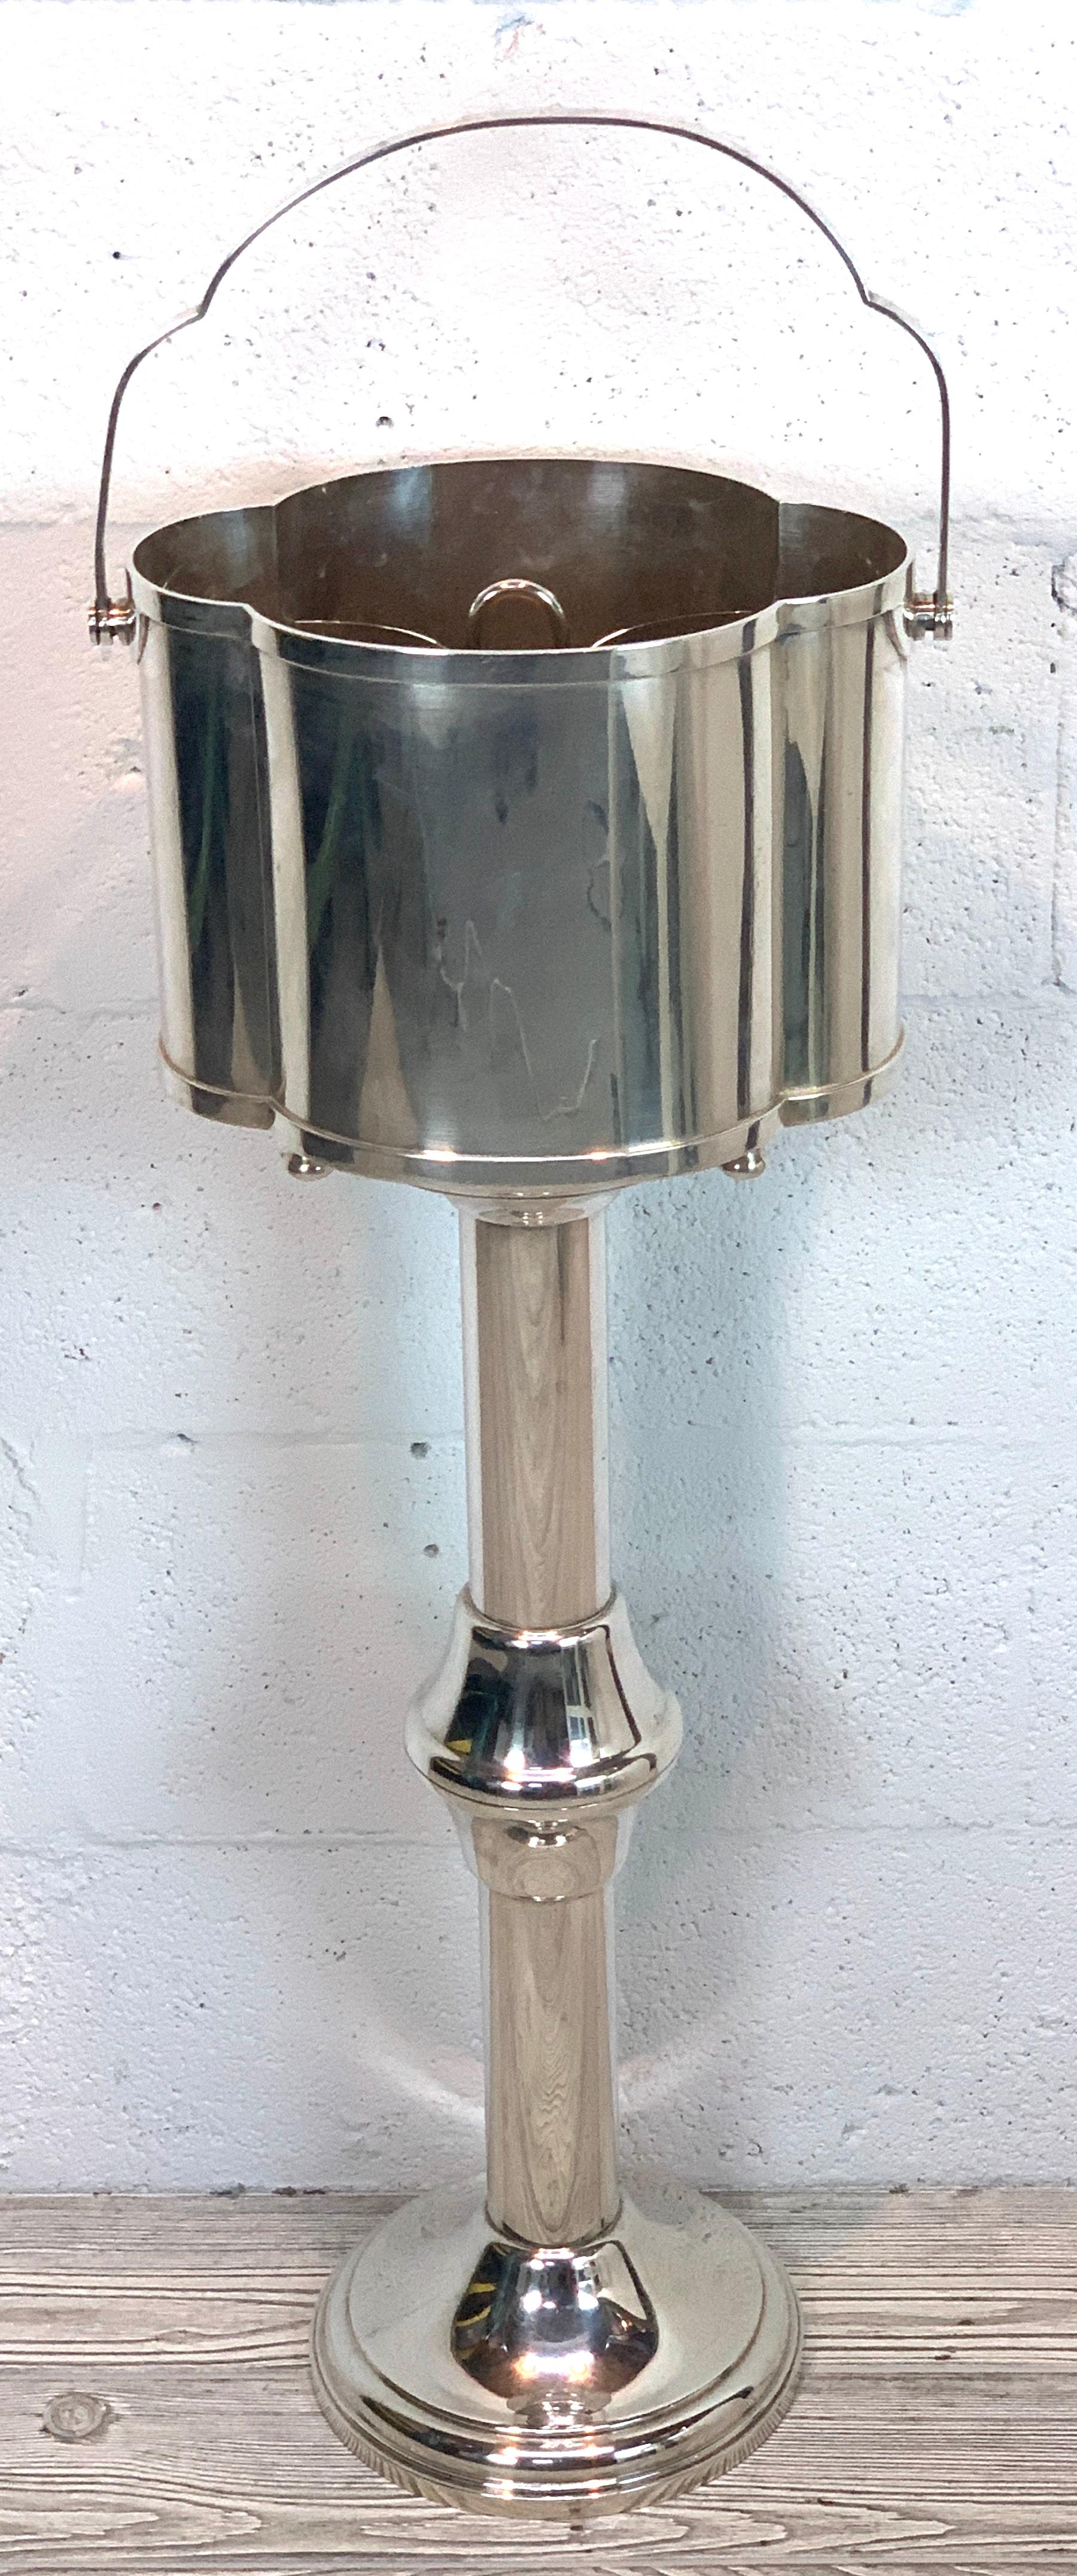 Modern silver plated double champagne bucket and stand, exceptional quality in consisting of three parts oval handled champagne / wine bucket 12.5 W x 9” D x 15 H interior measures 10.75 x 8.25, complete with bottle caddy, caddy 7” x 5 x 7.5” H,